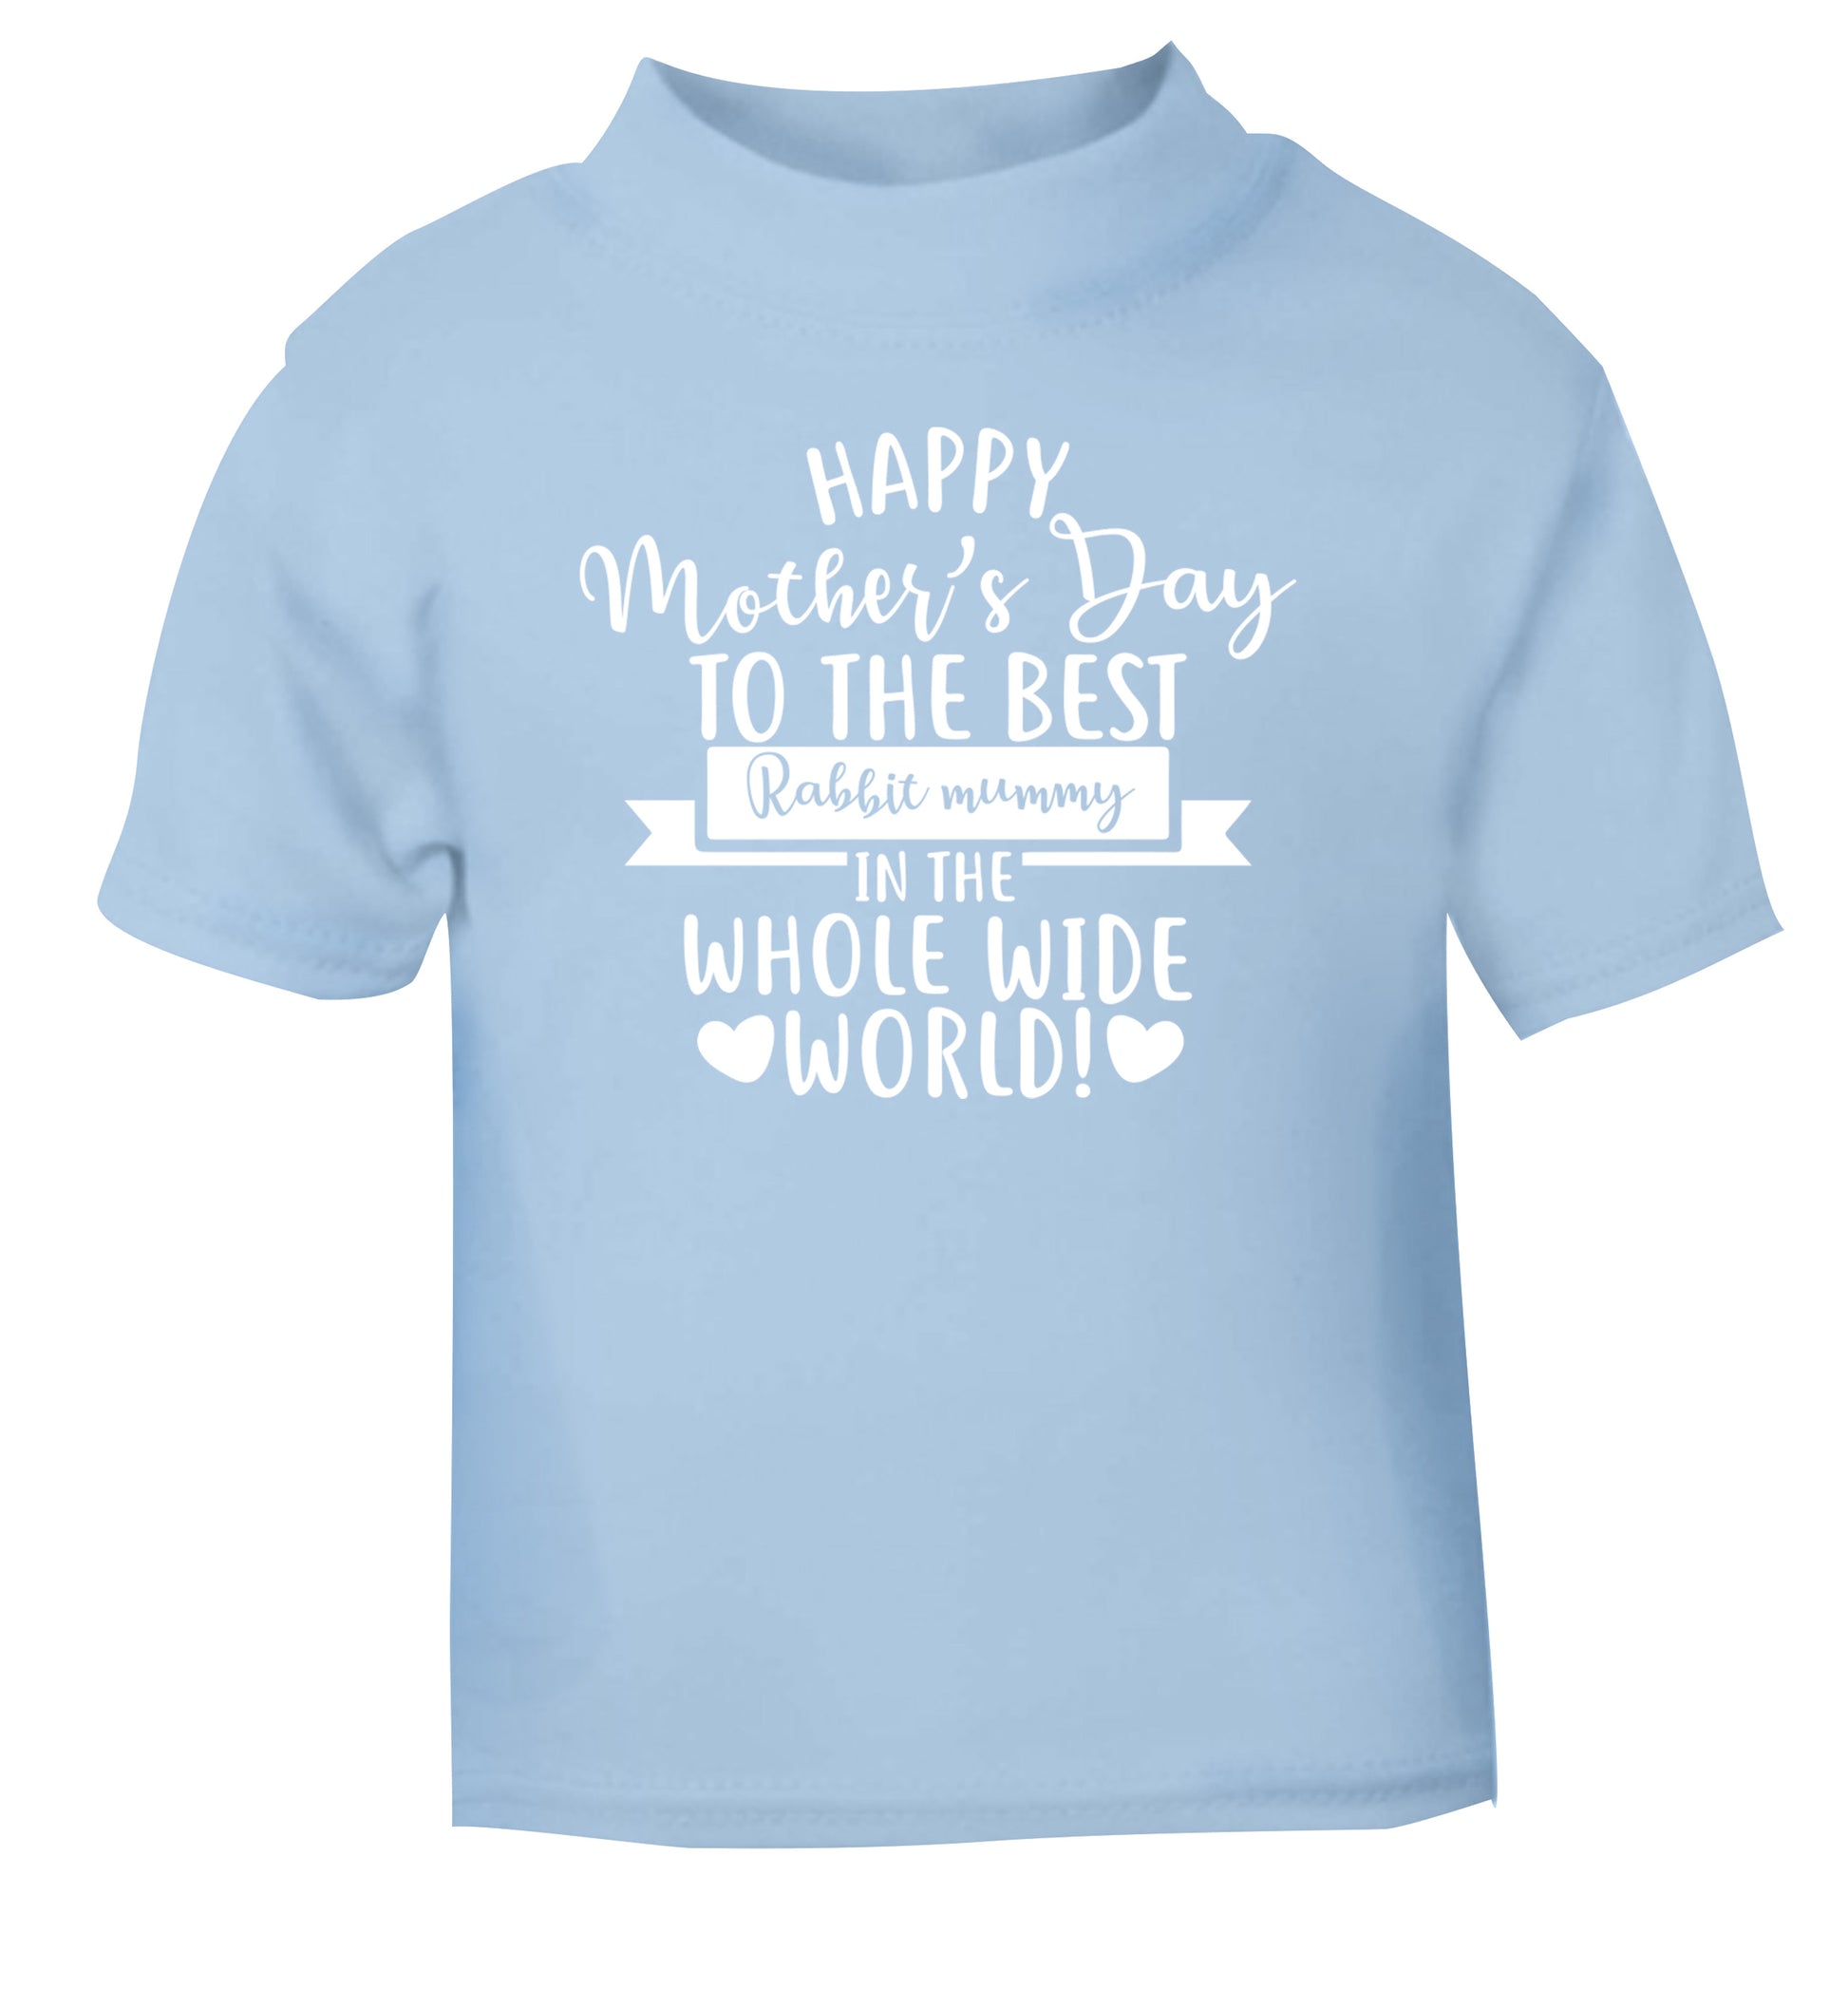 Happy mother's day to the best rabbit mummy in the world light blue Baby Toddler Tshirt 2 Years